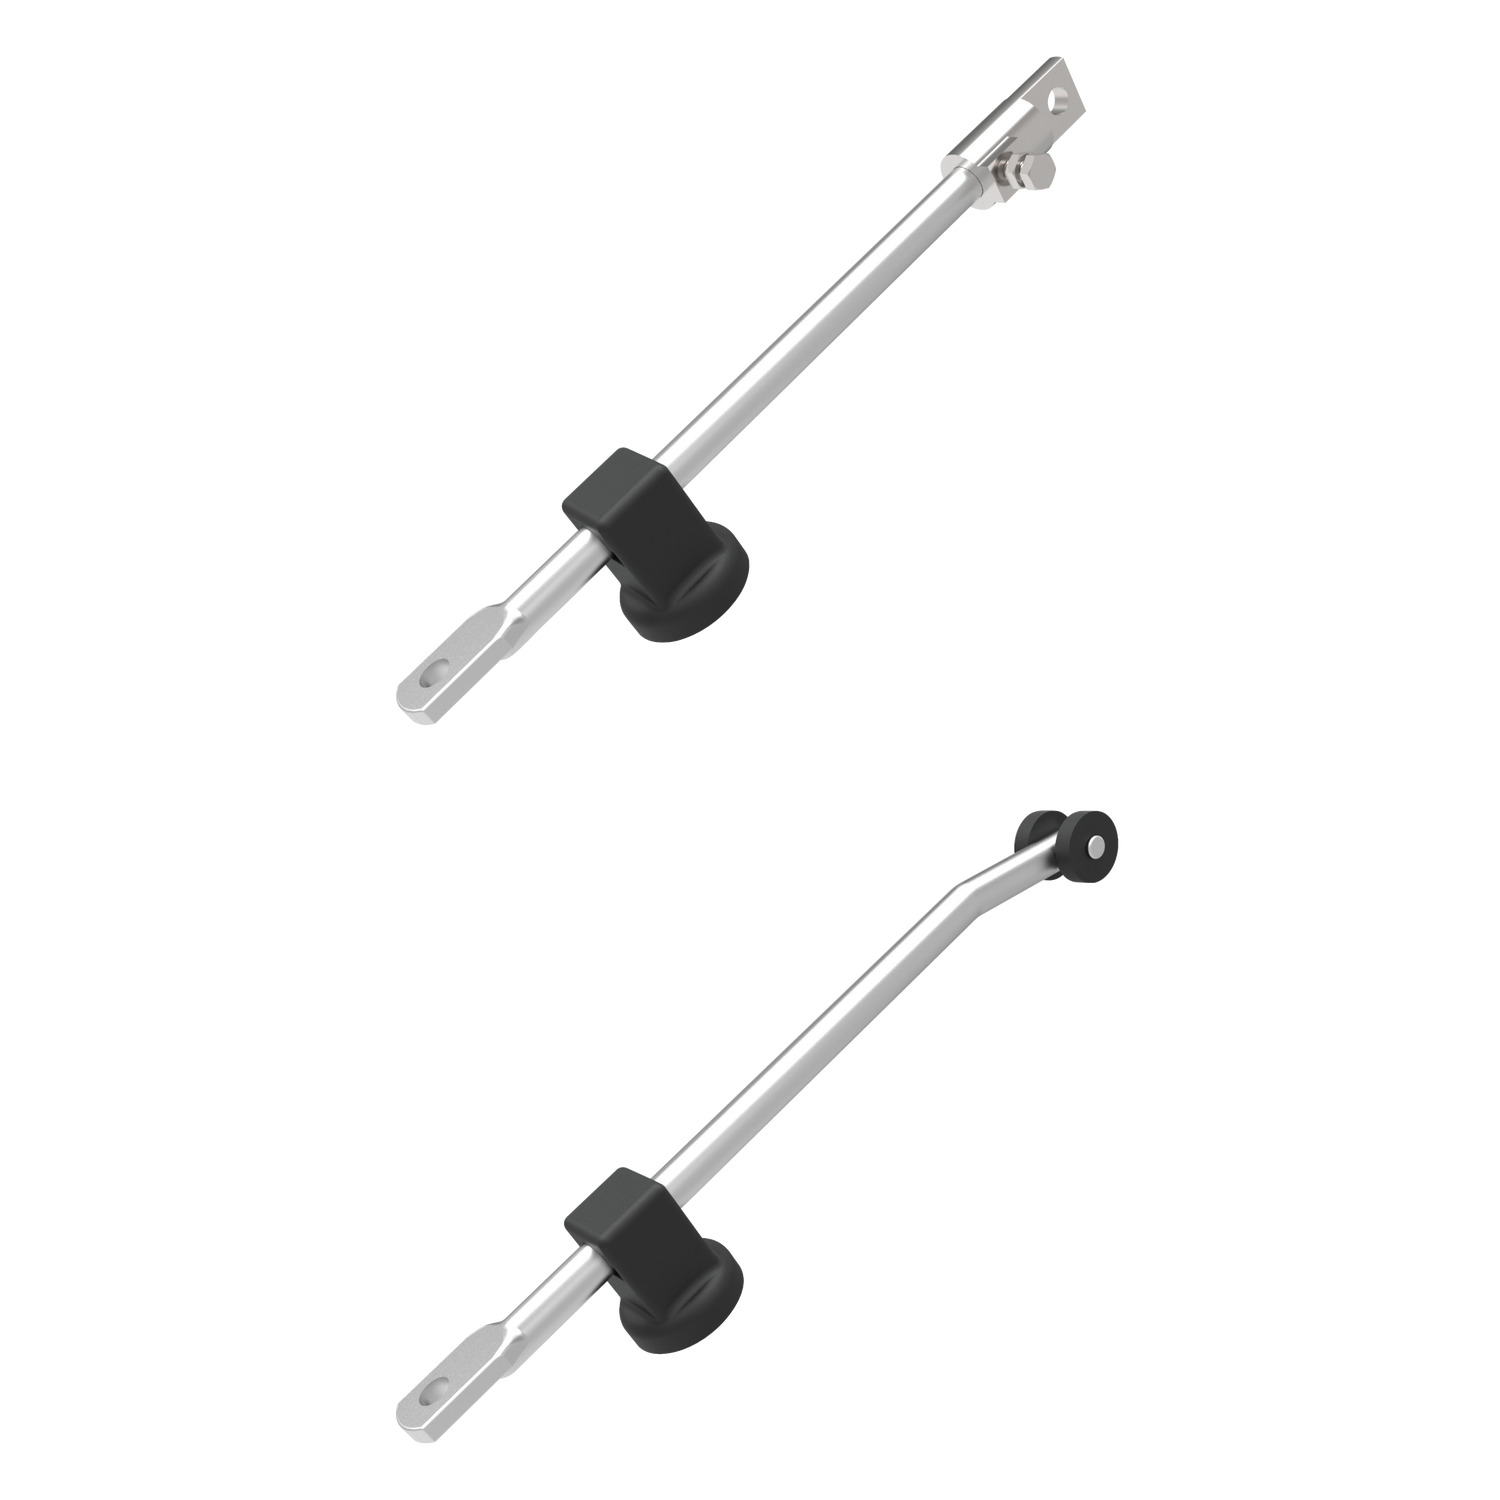 A0303.AW3080 Multi-Point Latching round rod - Steel, Zinc Plated - L=800mm